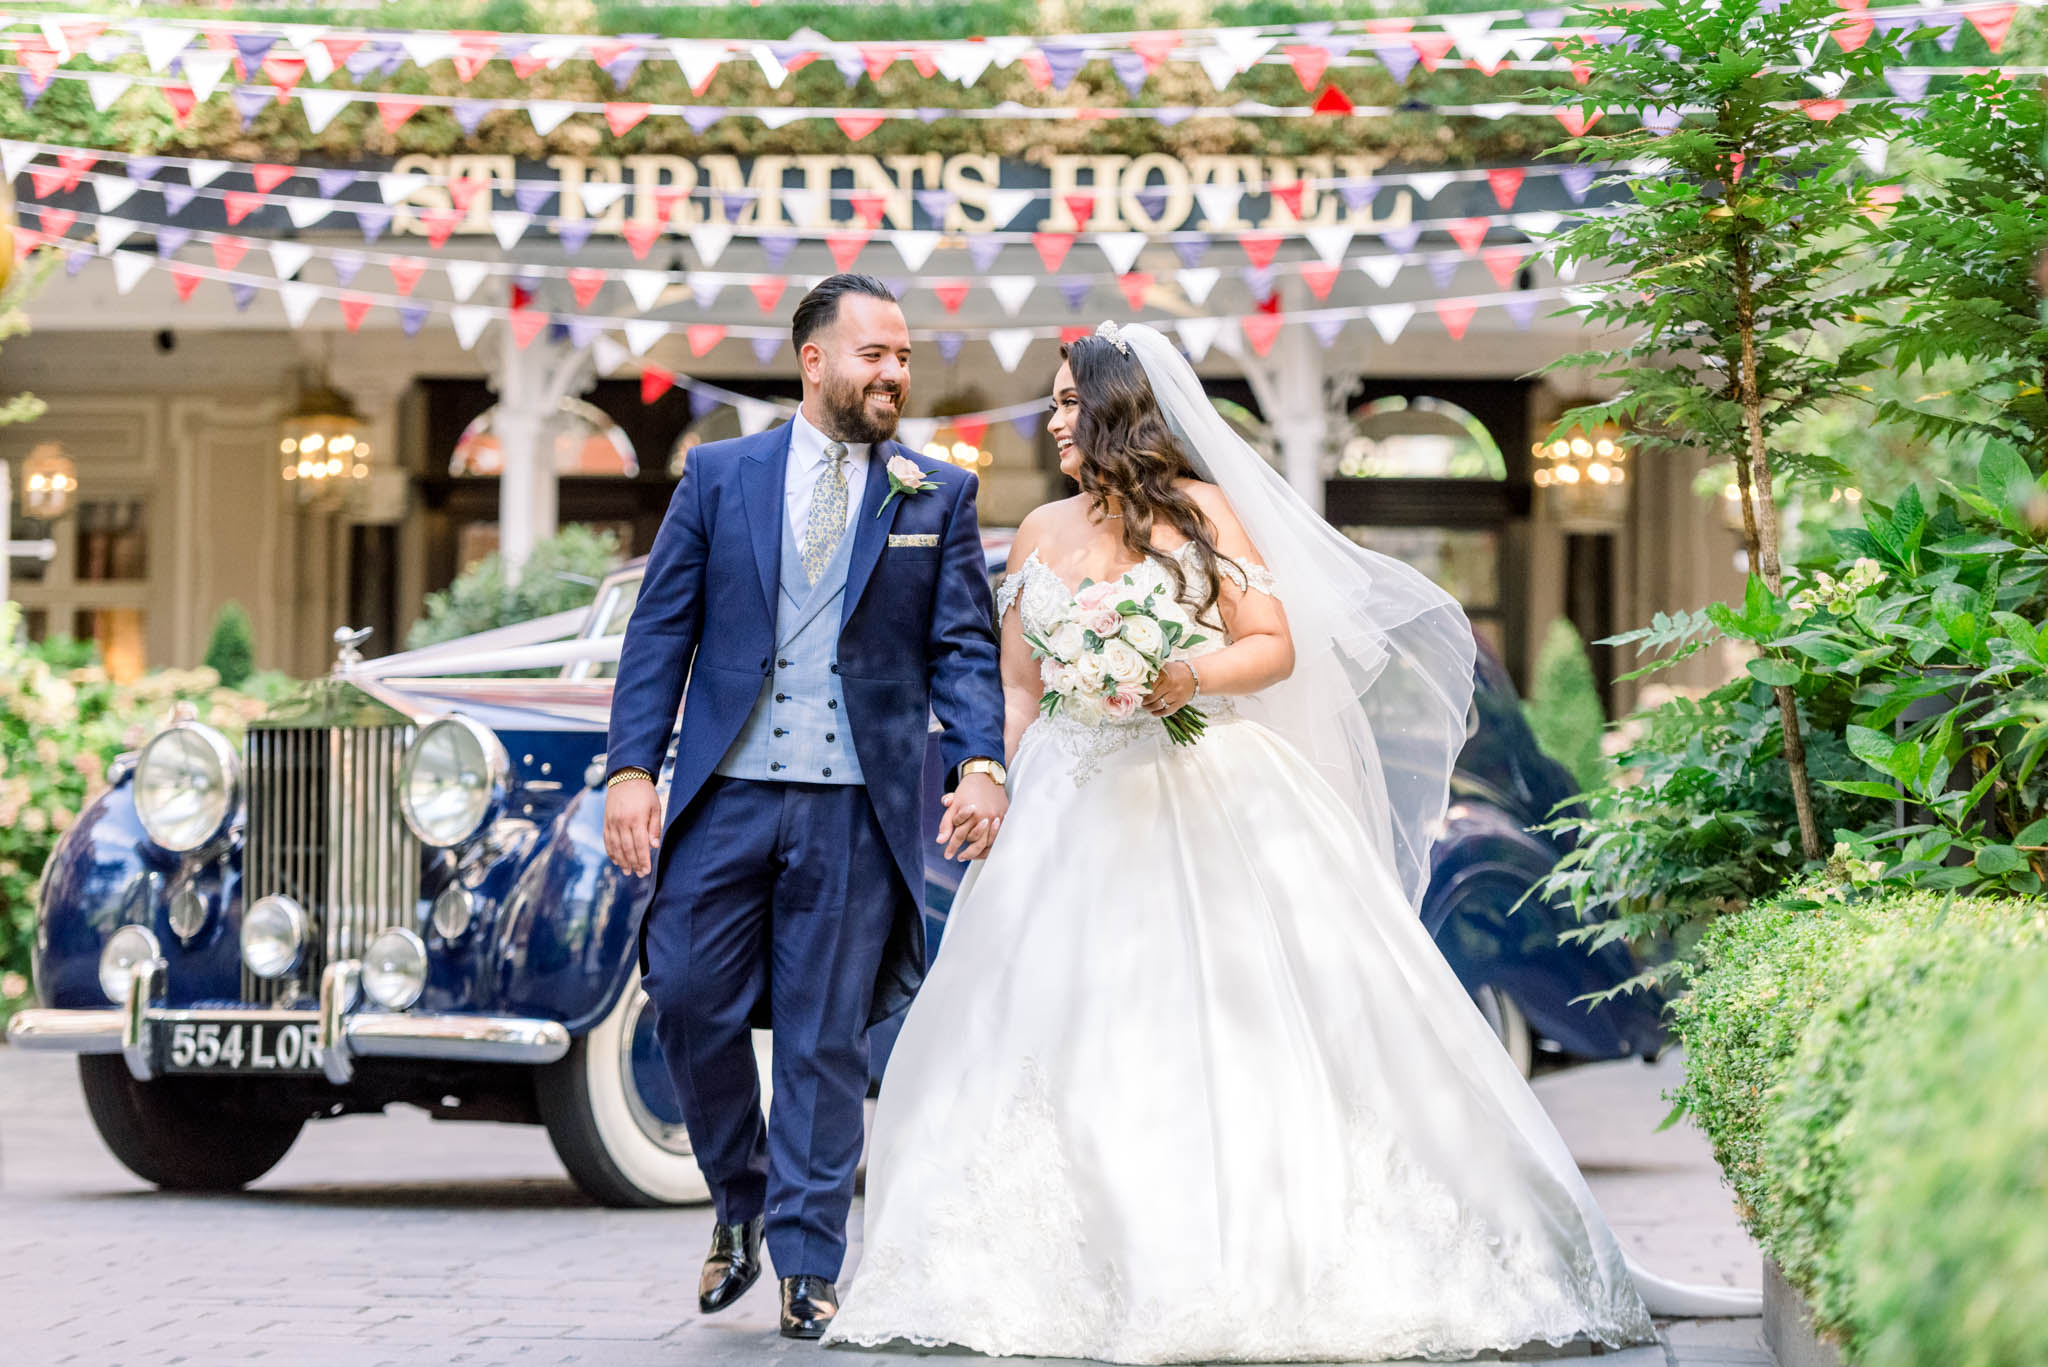 https://usercontent.one/wp/www.natalieandmax.co.uk/wp-content/uploads/2022/09/S-J-Natalie-and-Max-Photo-and-Films-St.-Ermins-Hotel-Wedding-Photography-480.jpg?media=1711985334